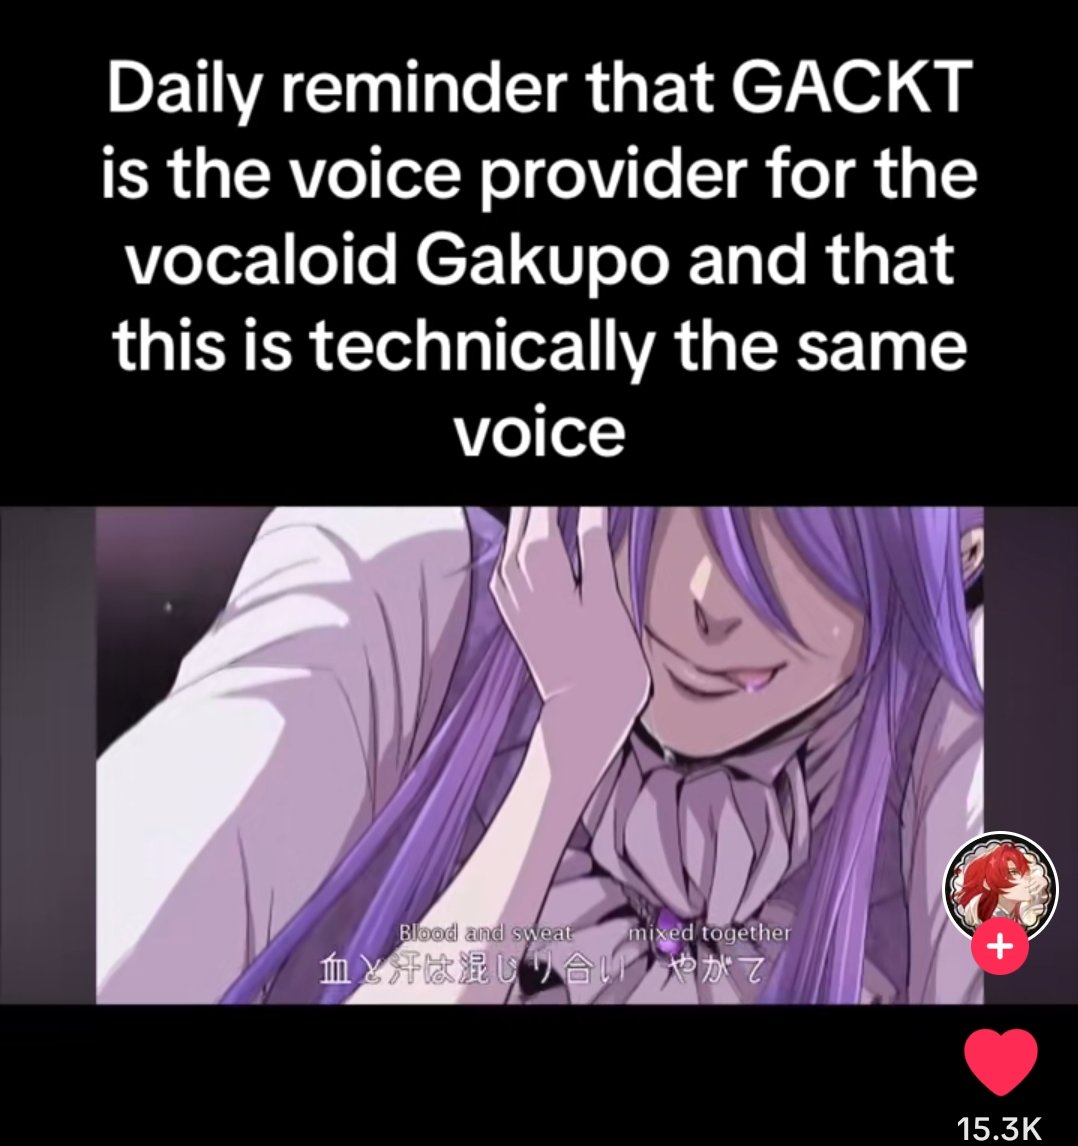 people posting this as if gackt wasnt getting FREAKY with malice mizer back in the 90s